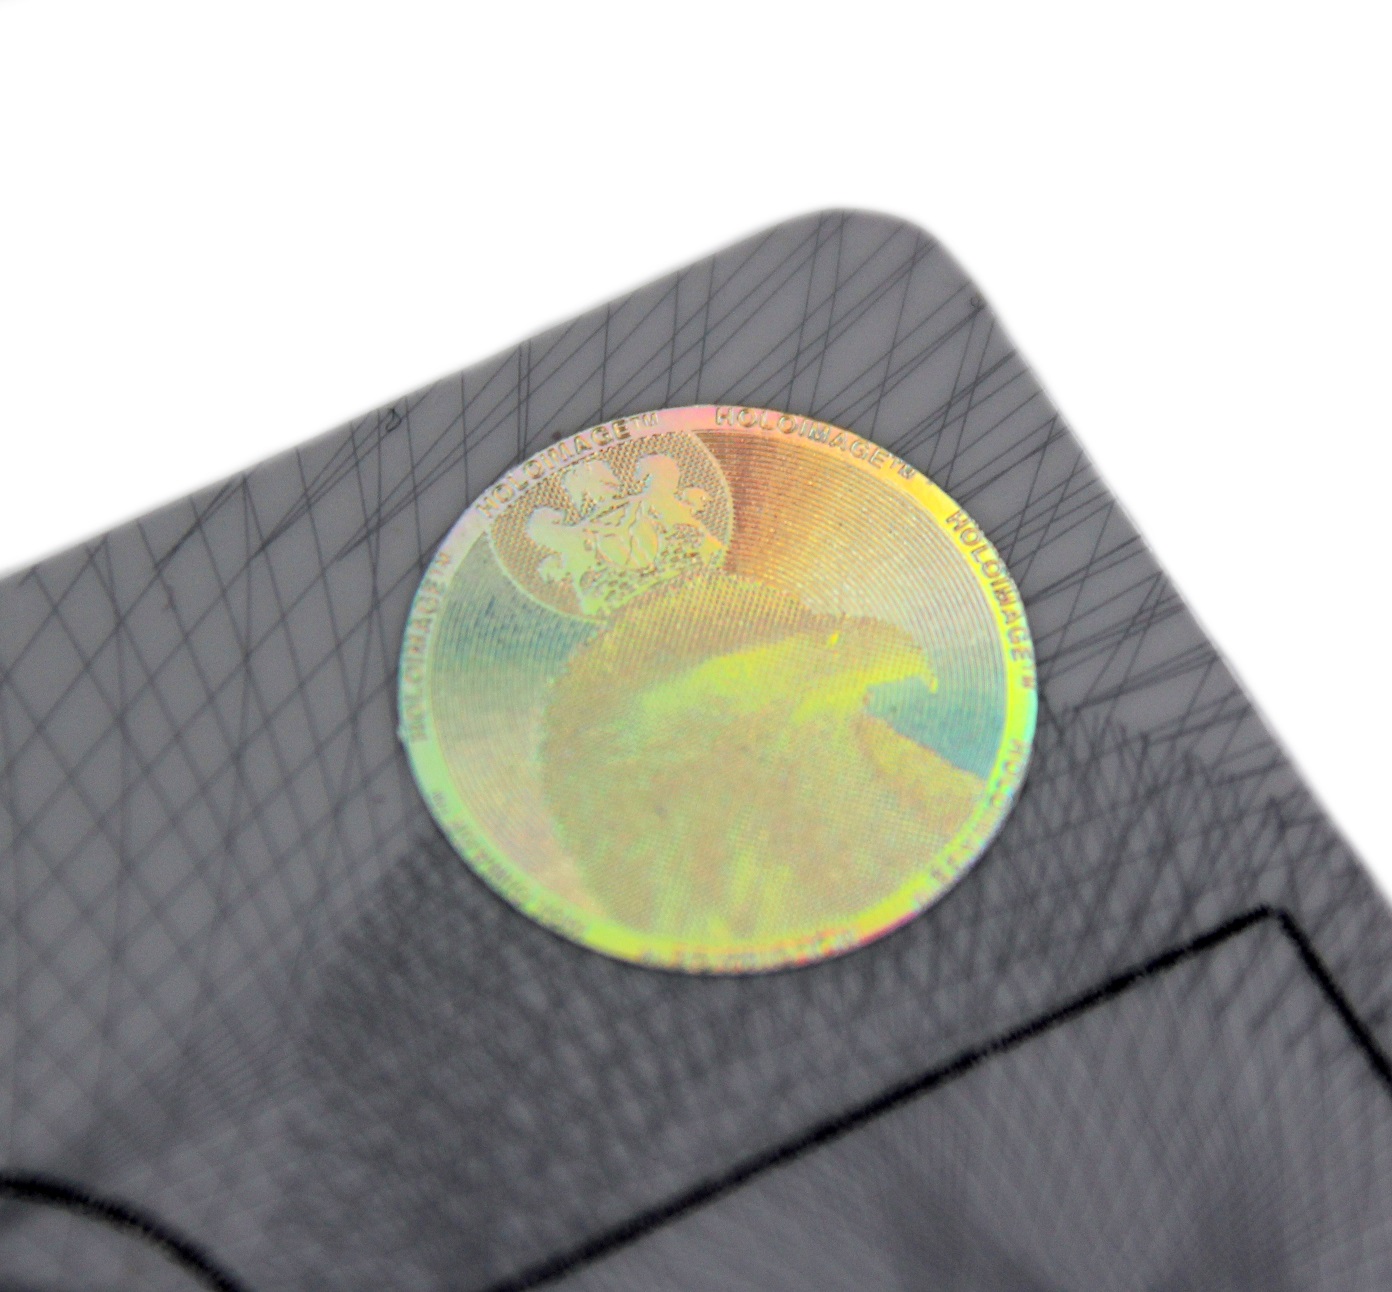 Hologram designs make it difficult to counterfeit ID cards.